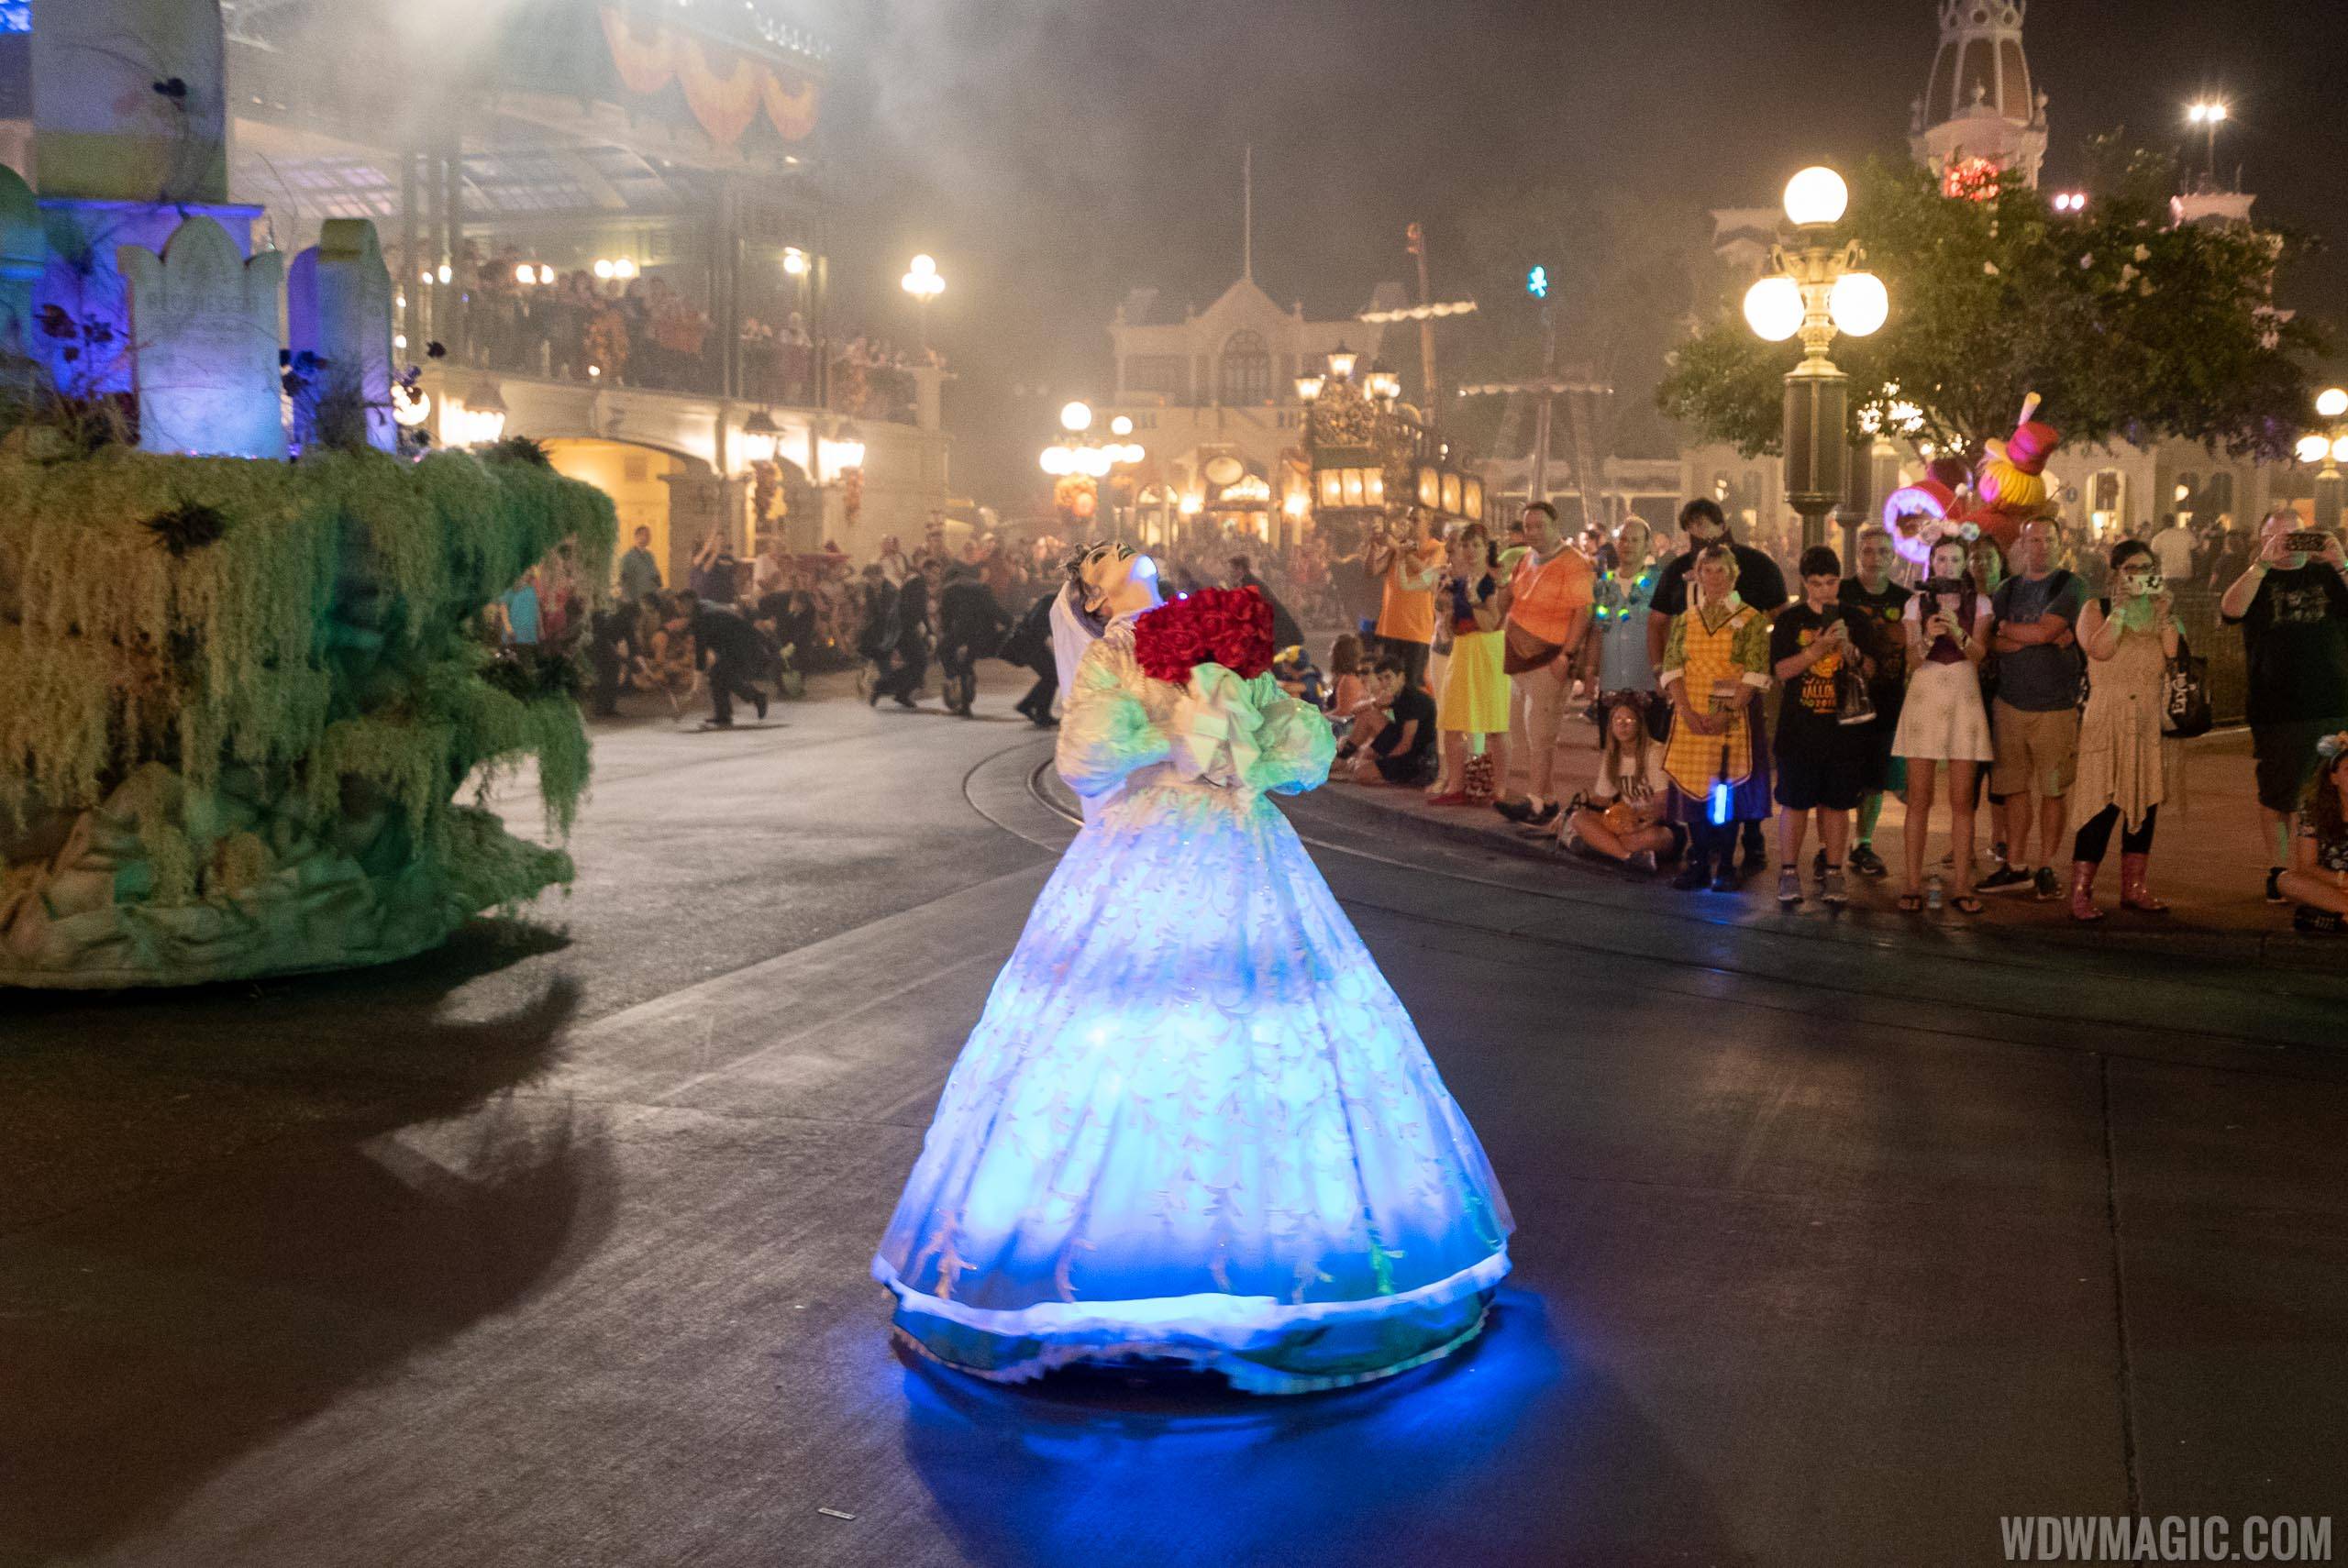 New additions to Mickey's Boo To You Halloween Parade 2019